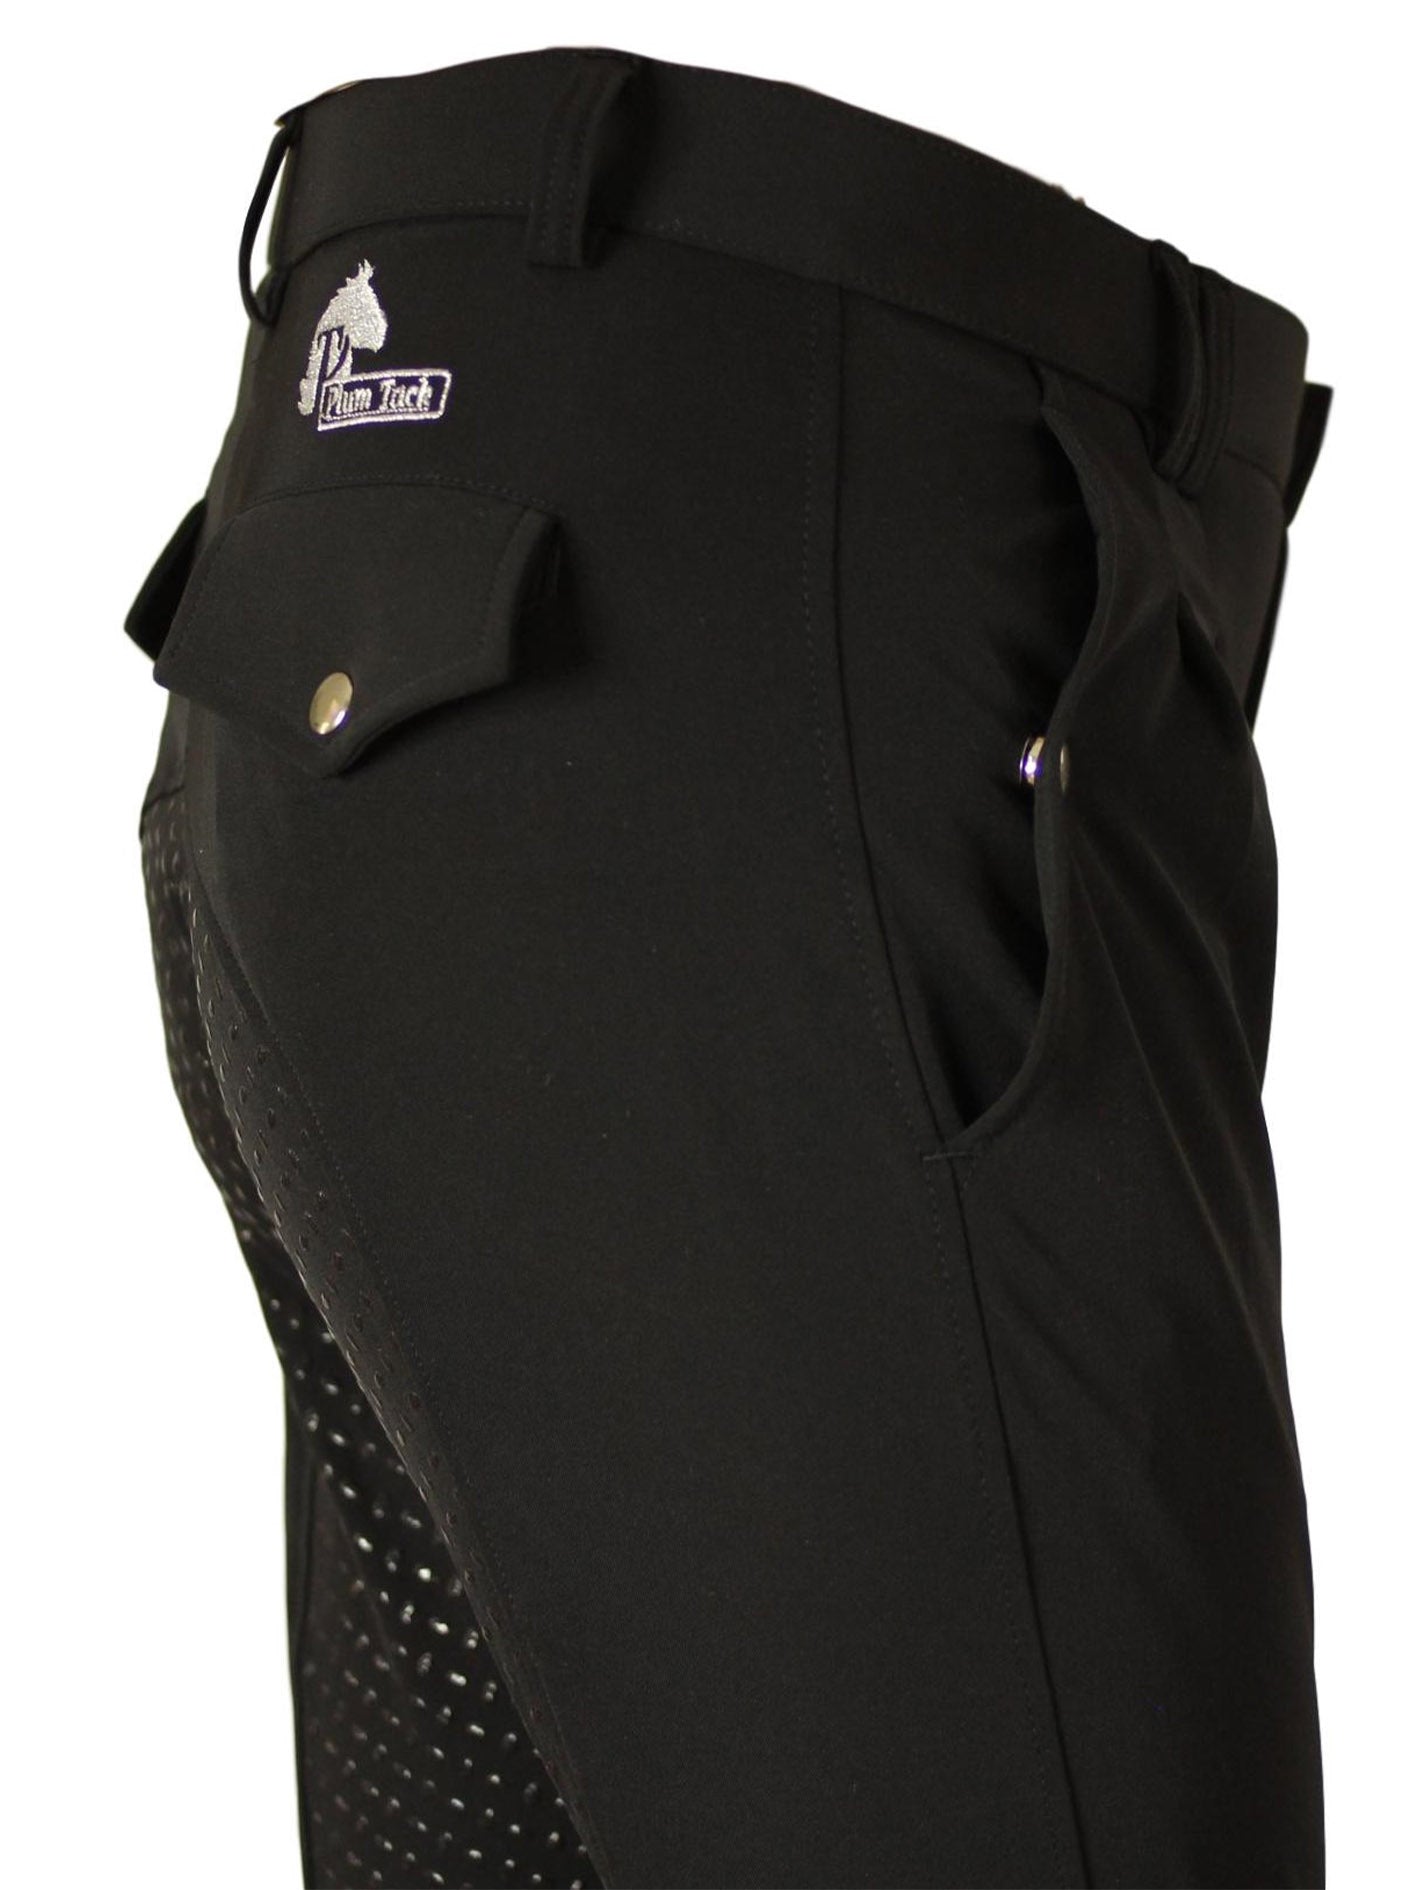 Men's Breeches in CoolMax Black with silicone grip seat